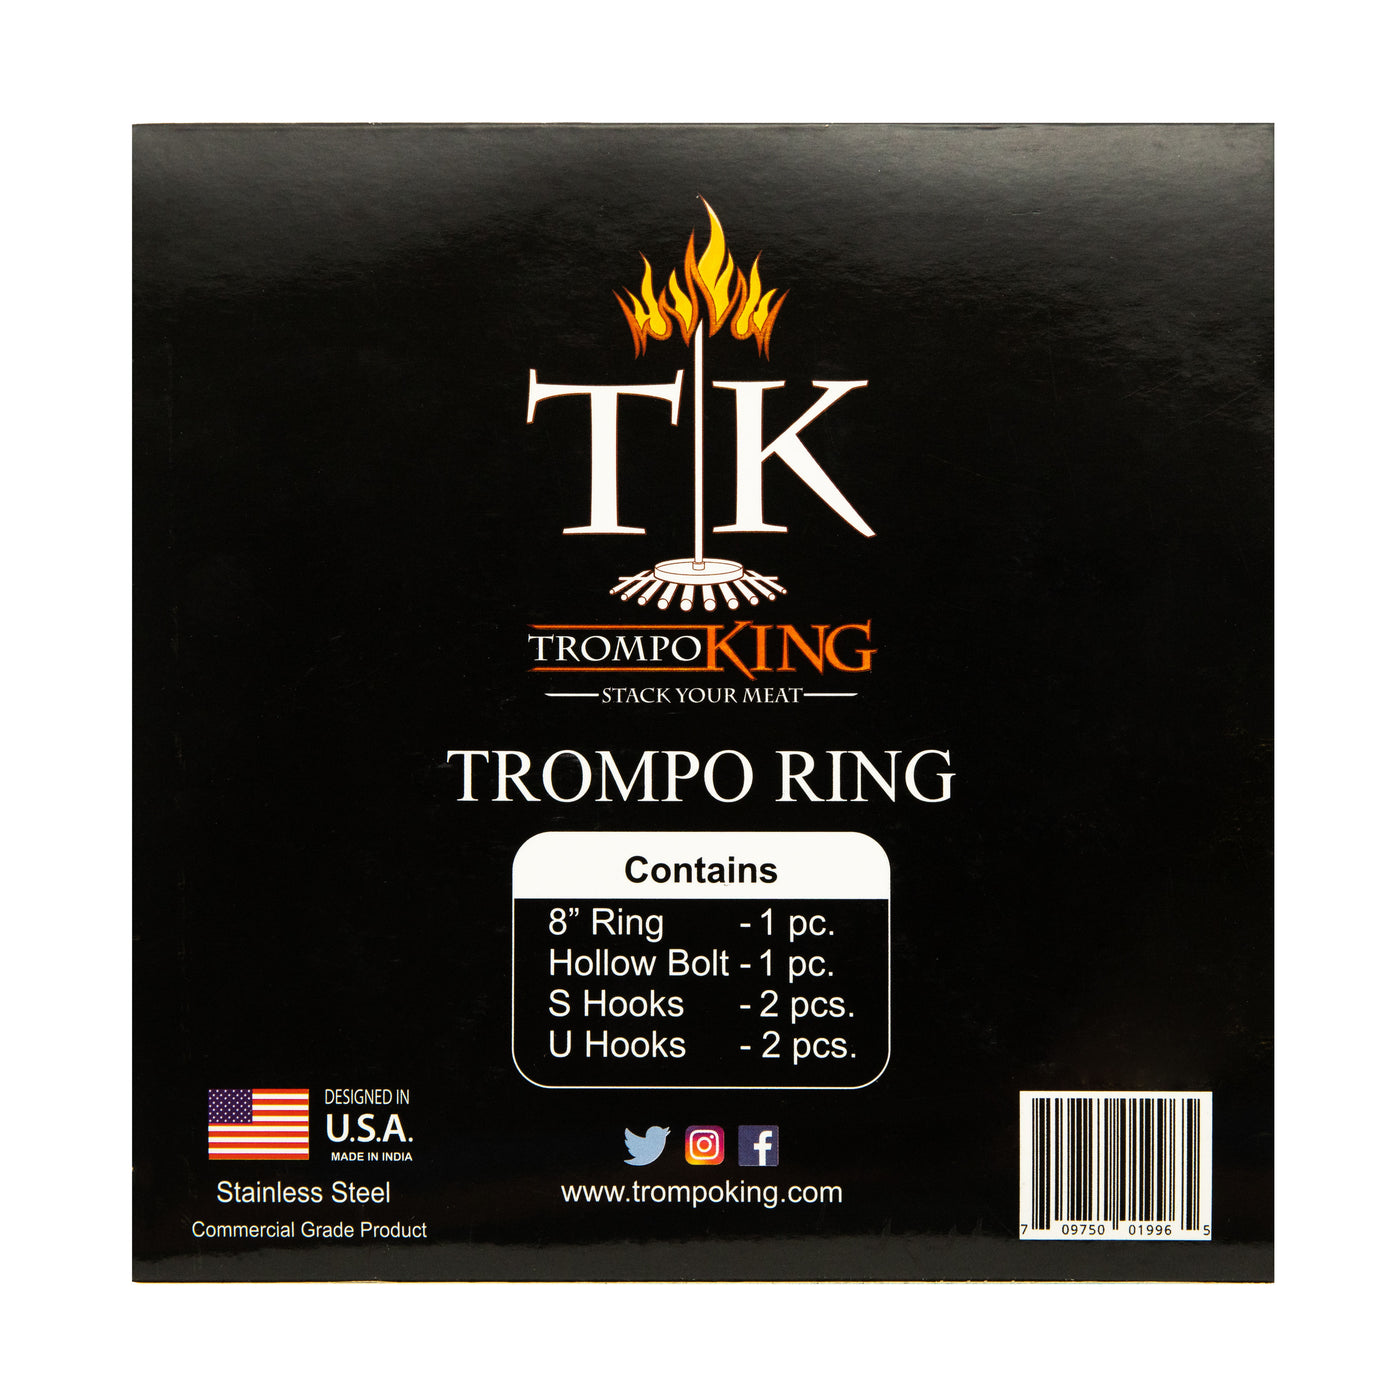 Trompo Ring™️ (Trompo King®️ sold separately)